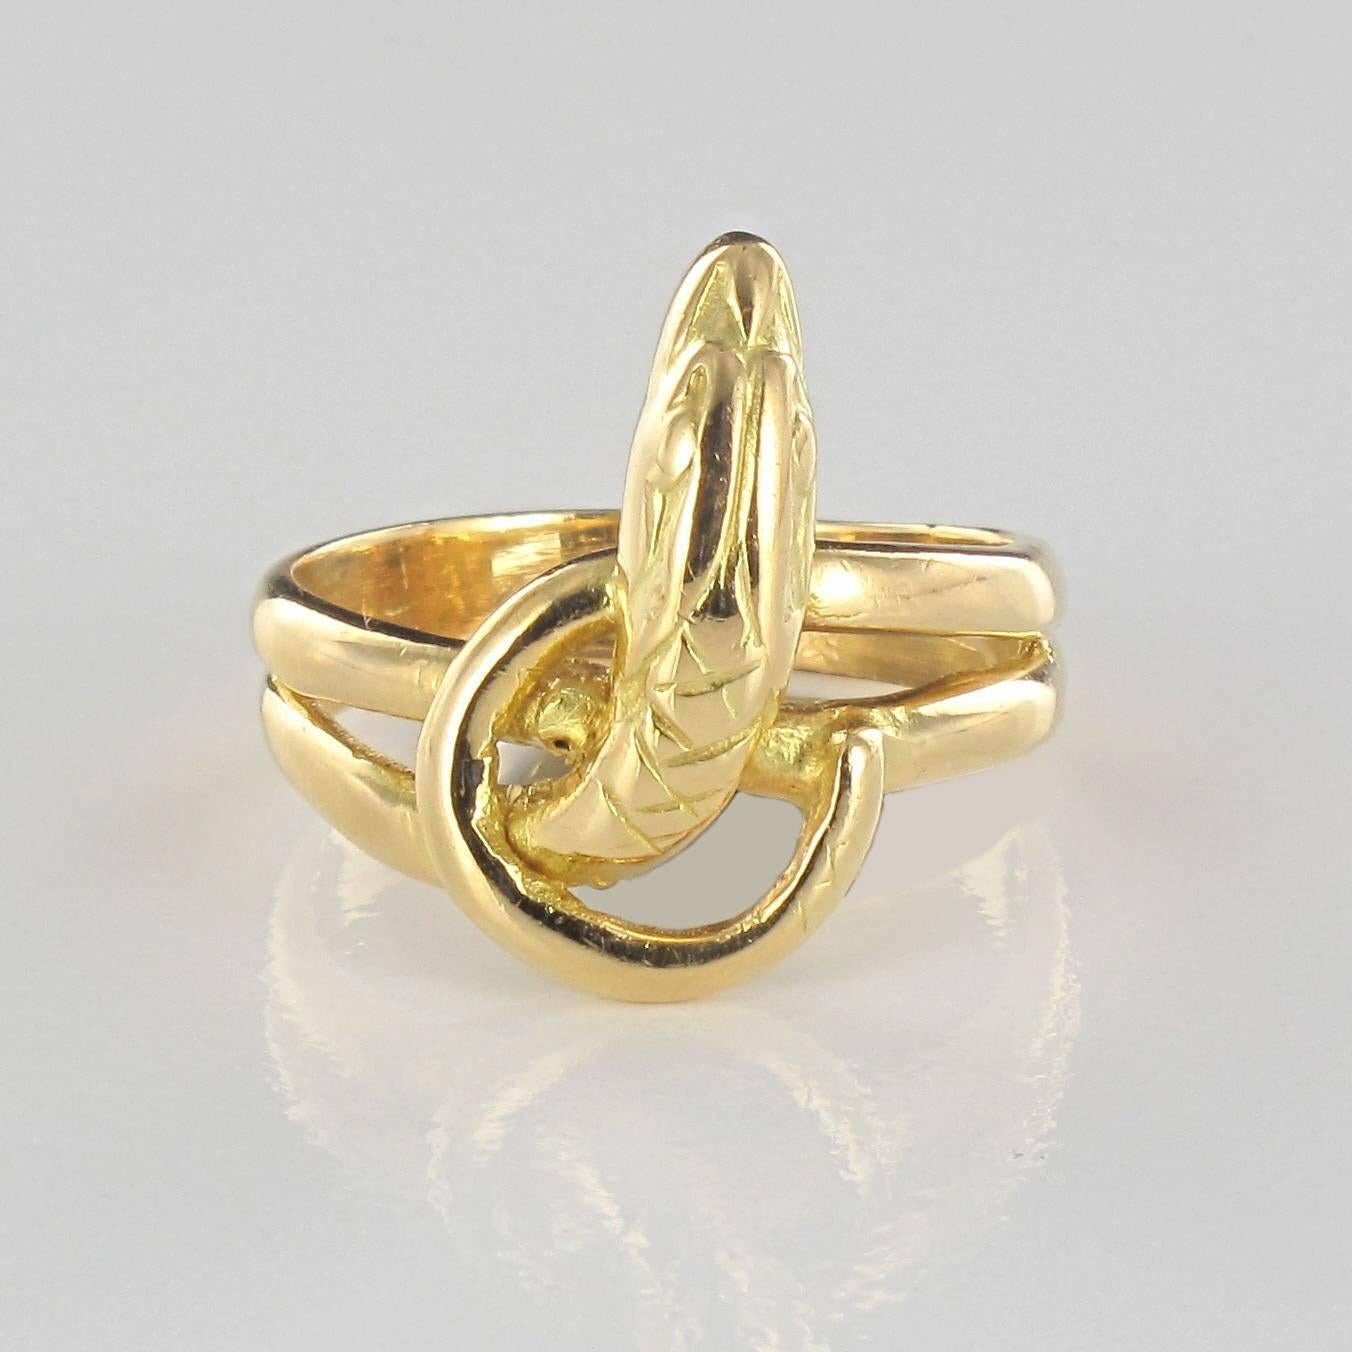 Ring in 18 carat yellow gold, owl hallmark. 

This splendid gold ring is typical of the style worn by both men and women in the 19th Century. A wide ring that features a snake with its body coiled around the finger twice. 

Width: 2.1 cm,